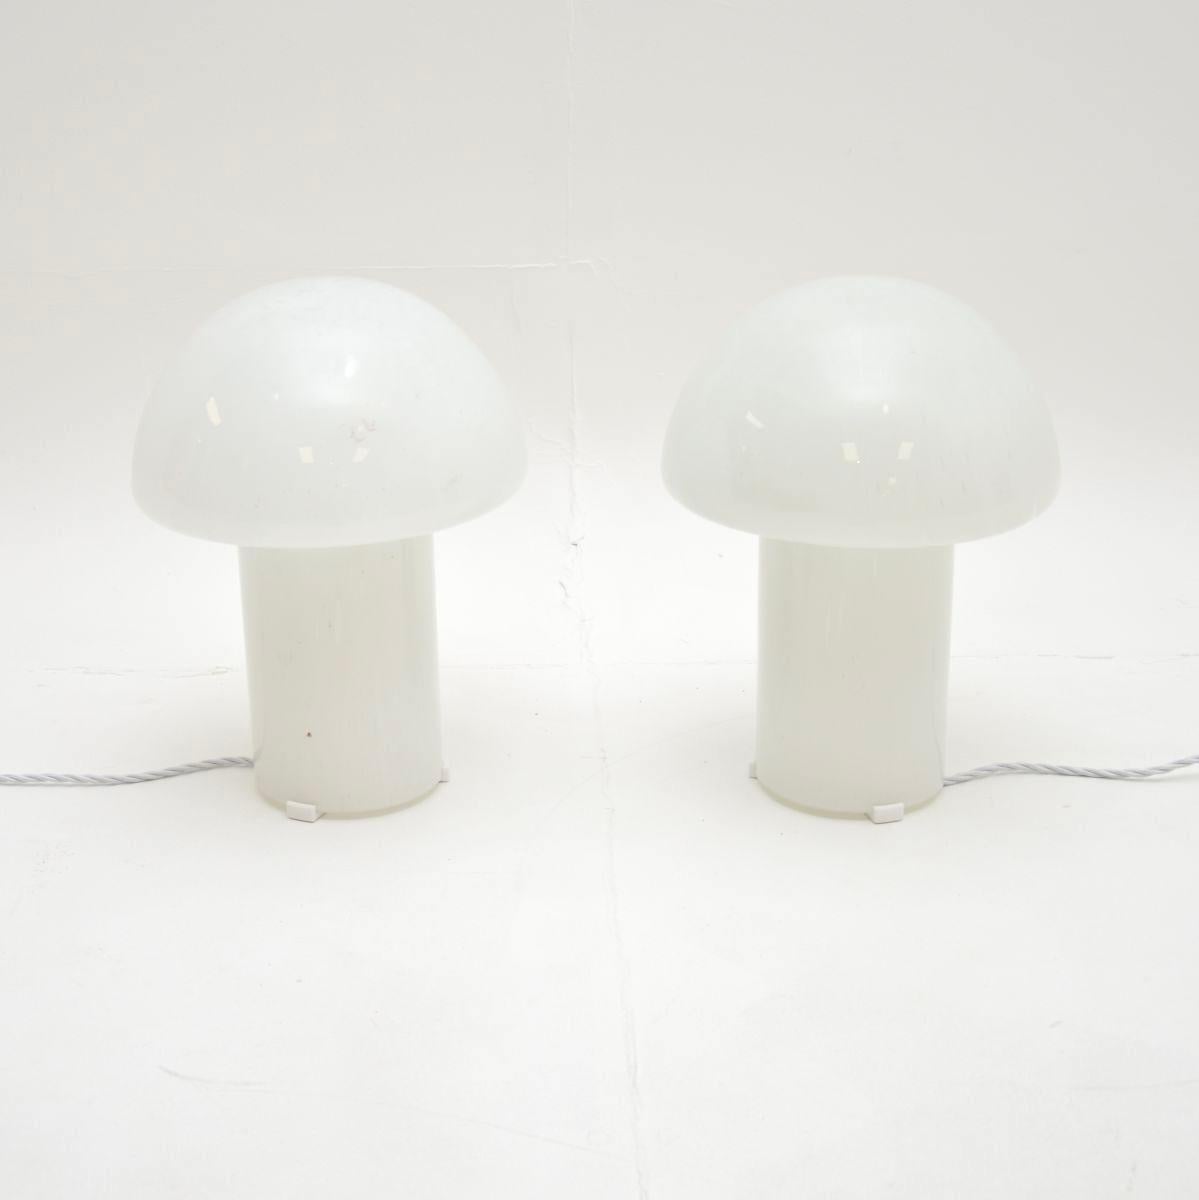 A stylish and beautifully made pair of vintage Italian Murano glass mushroom lamps. They were made in Italy and date from around the 1970’s.

The quality is outstanding, they are a great size with a stylish design. The white glass has some swirling